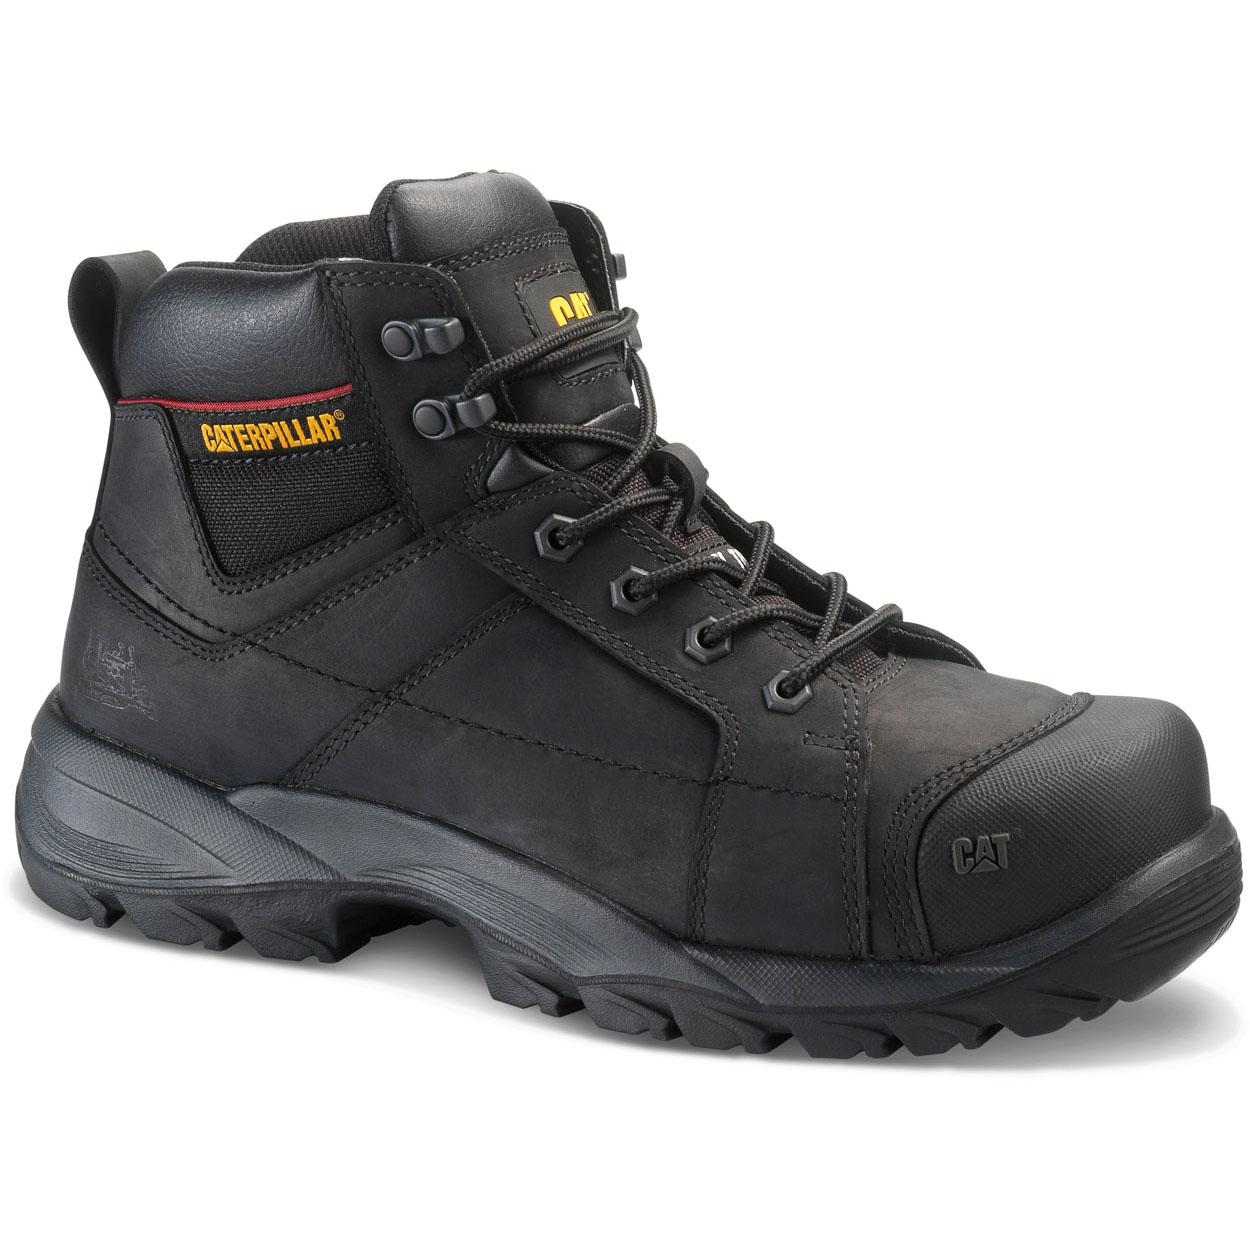 Caterpillar Boots Lahore - Caterpillar Crossrail St Mens Safety Boots Black (587340-MFI)